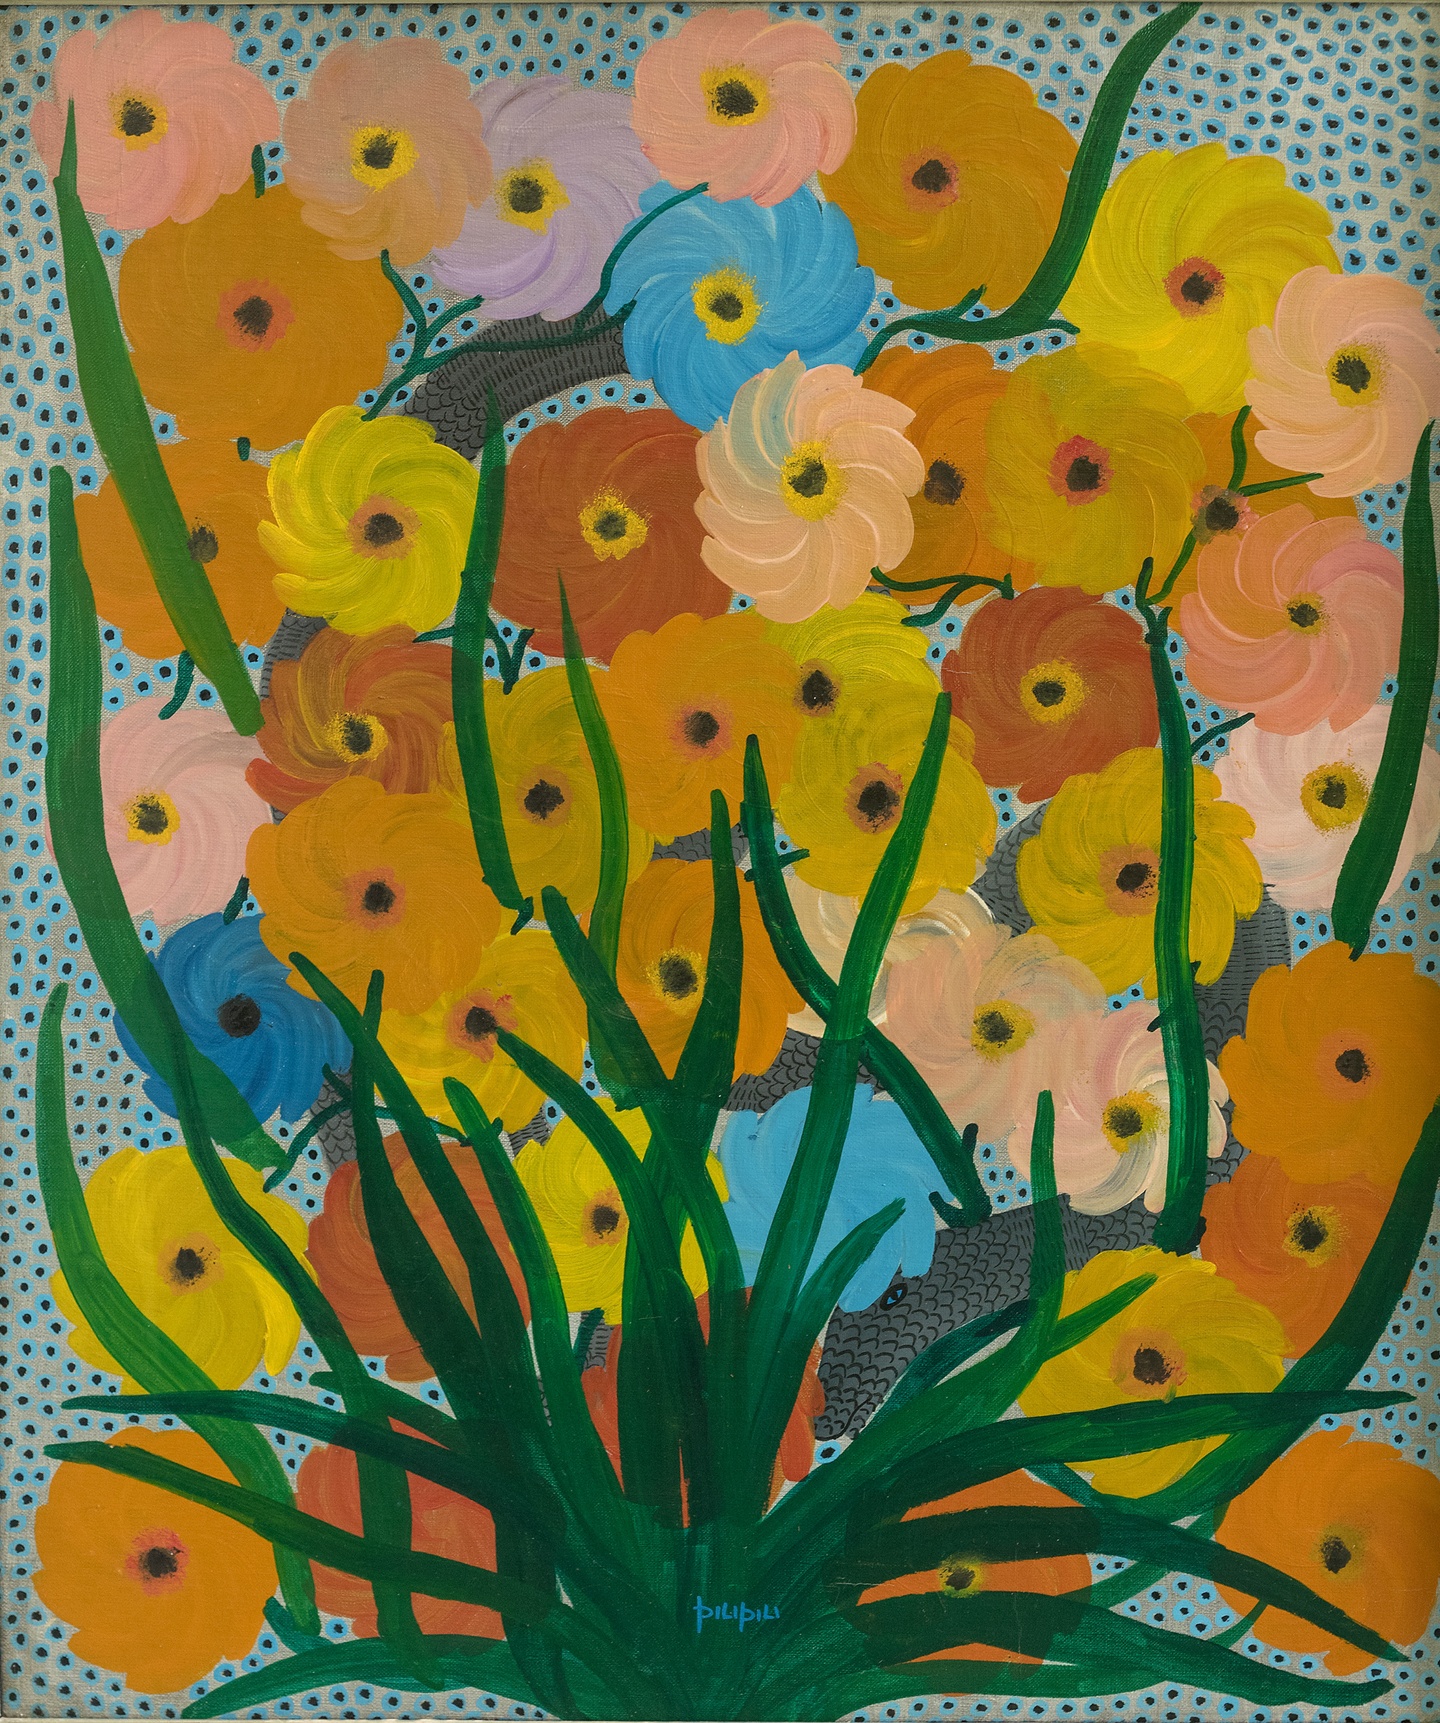 A painting depicting colorful flowers with a snake weaving throughout them